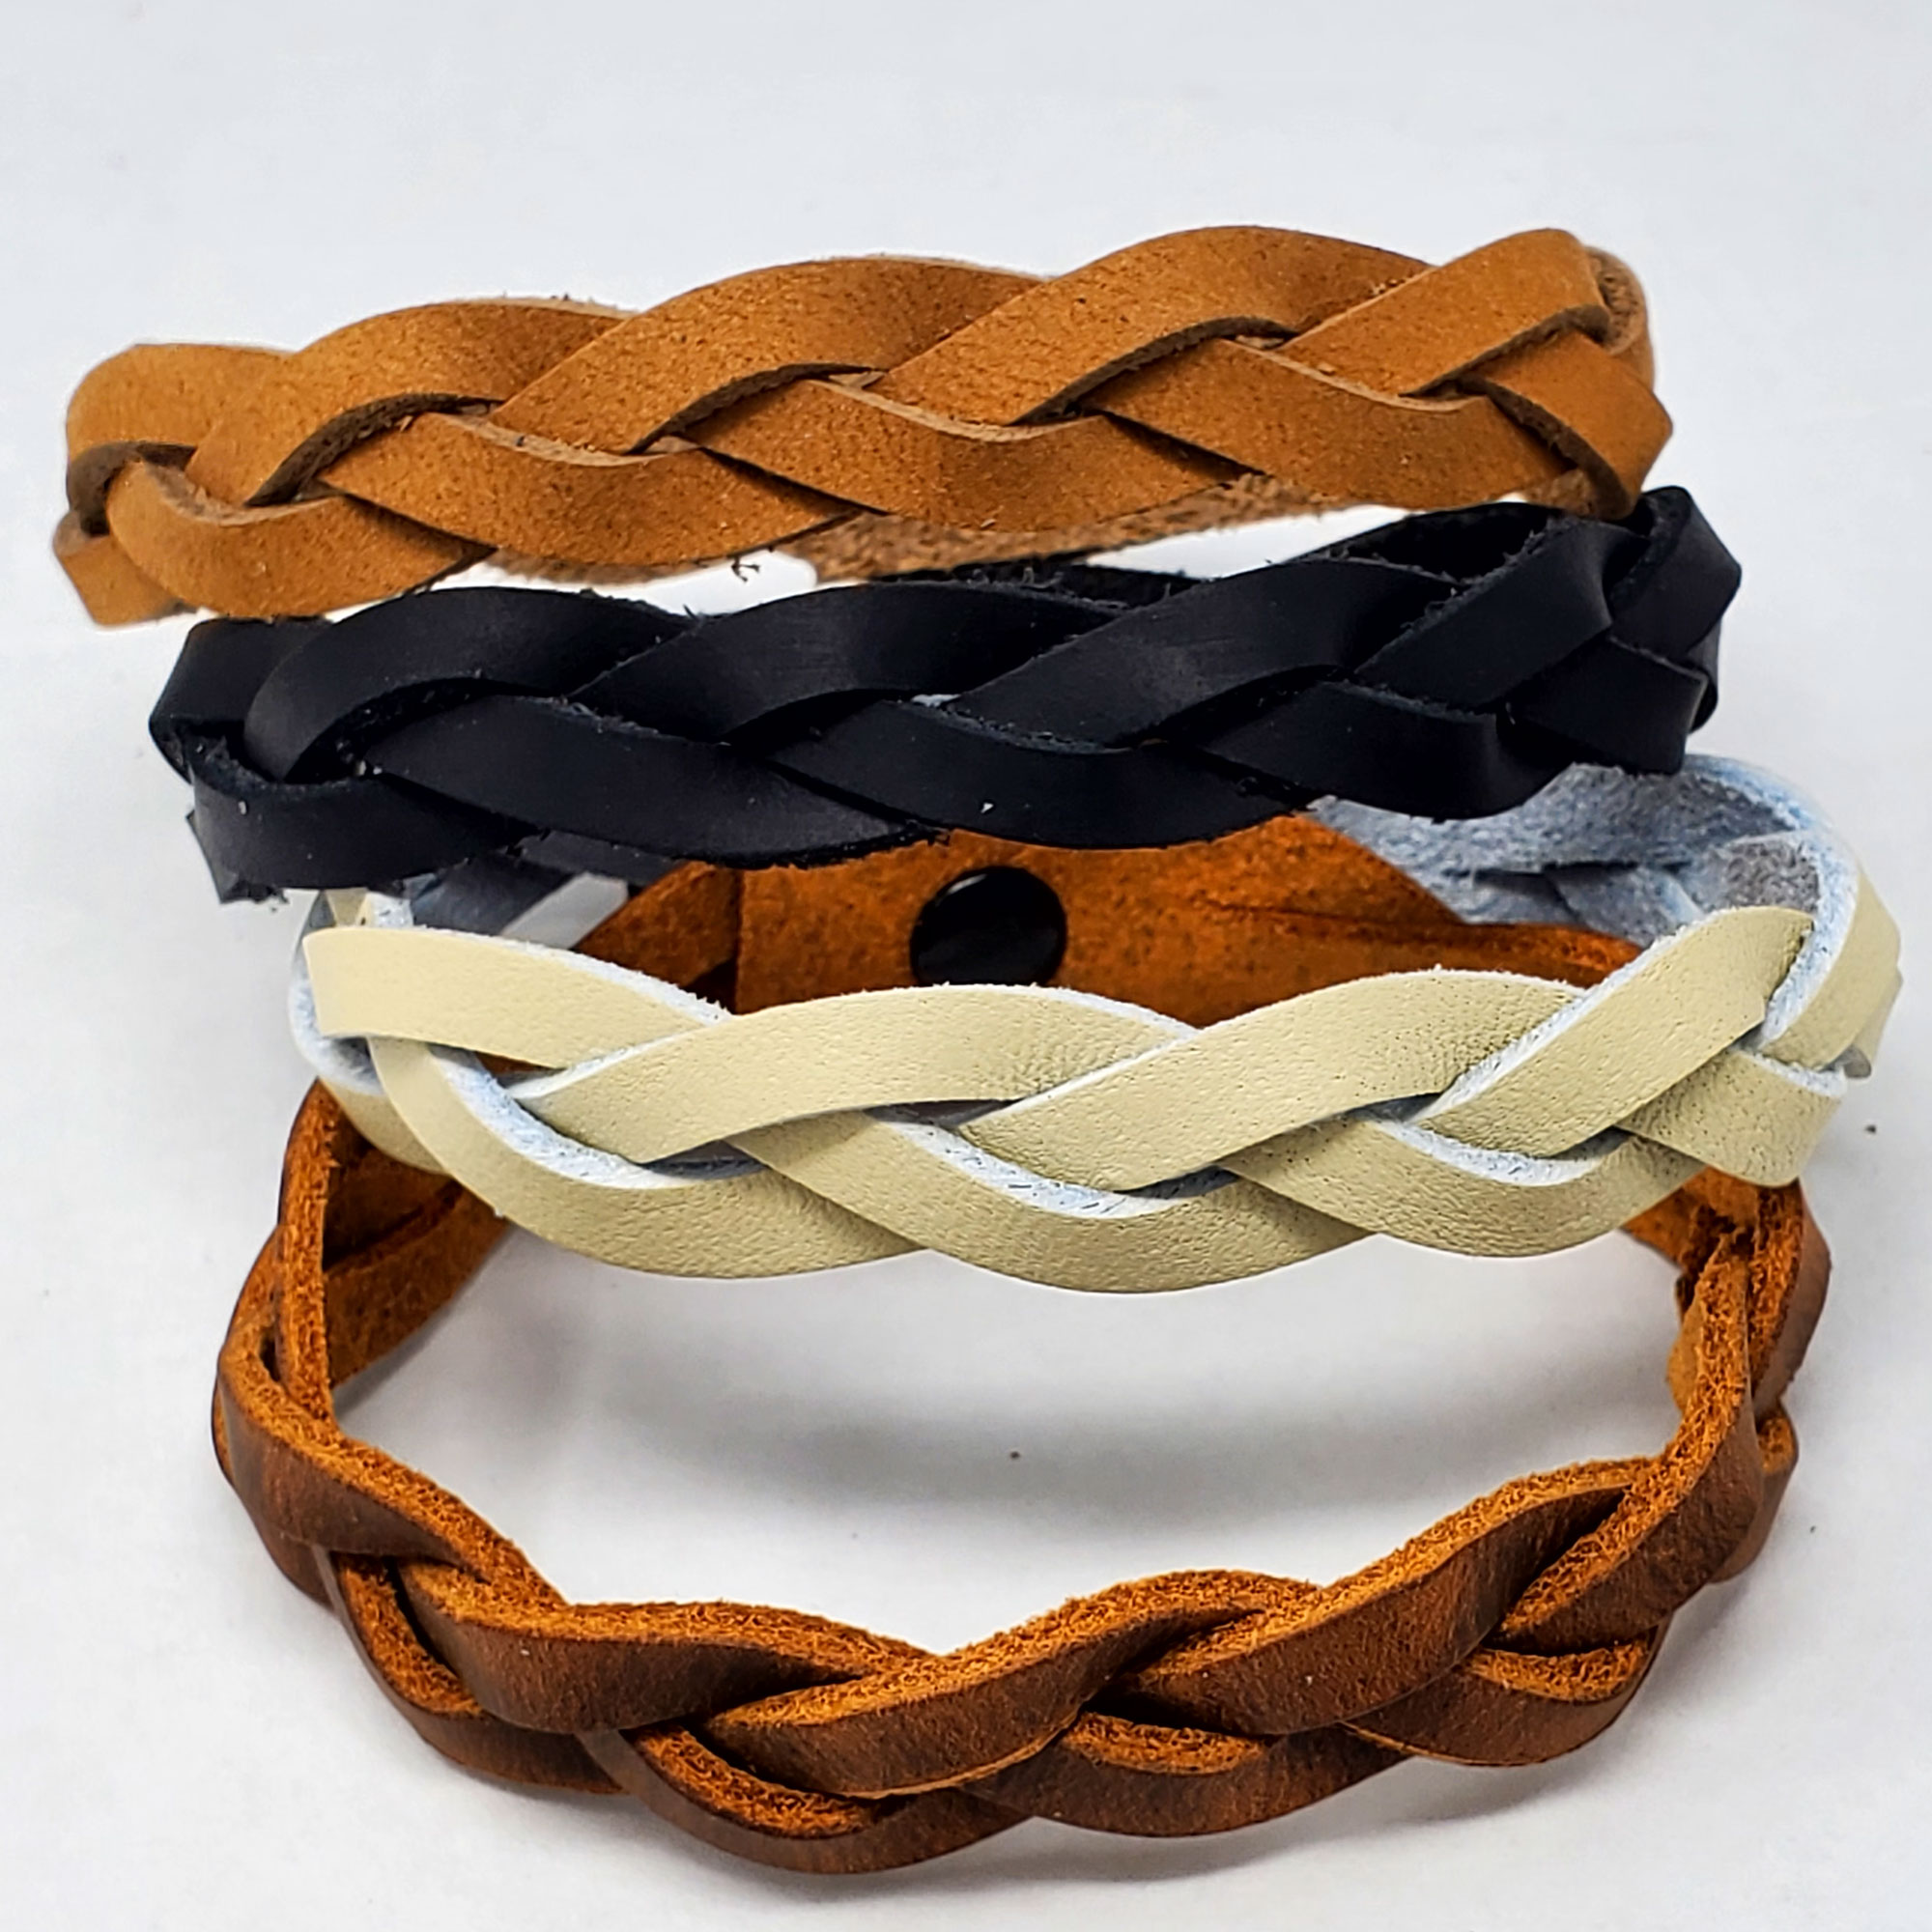 How to Make Braided Bracelets from Recycled Belts / The Beading Gem